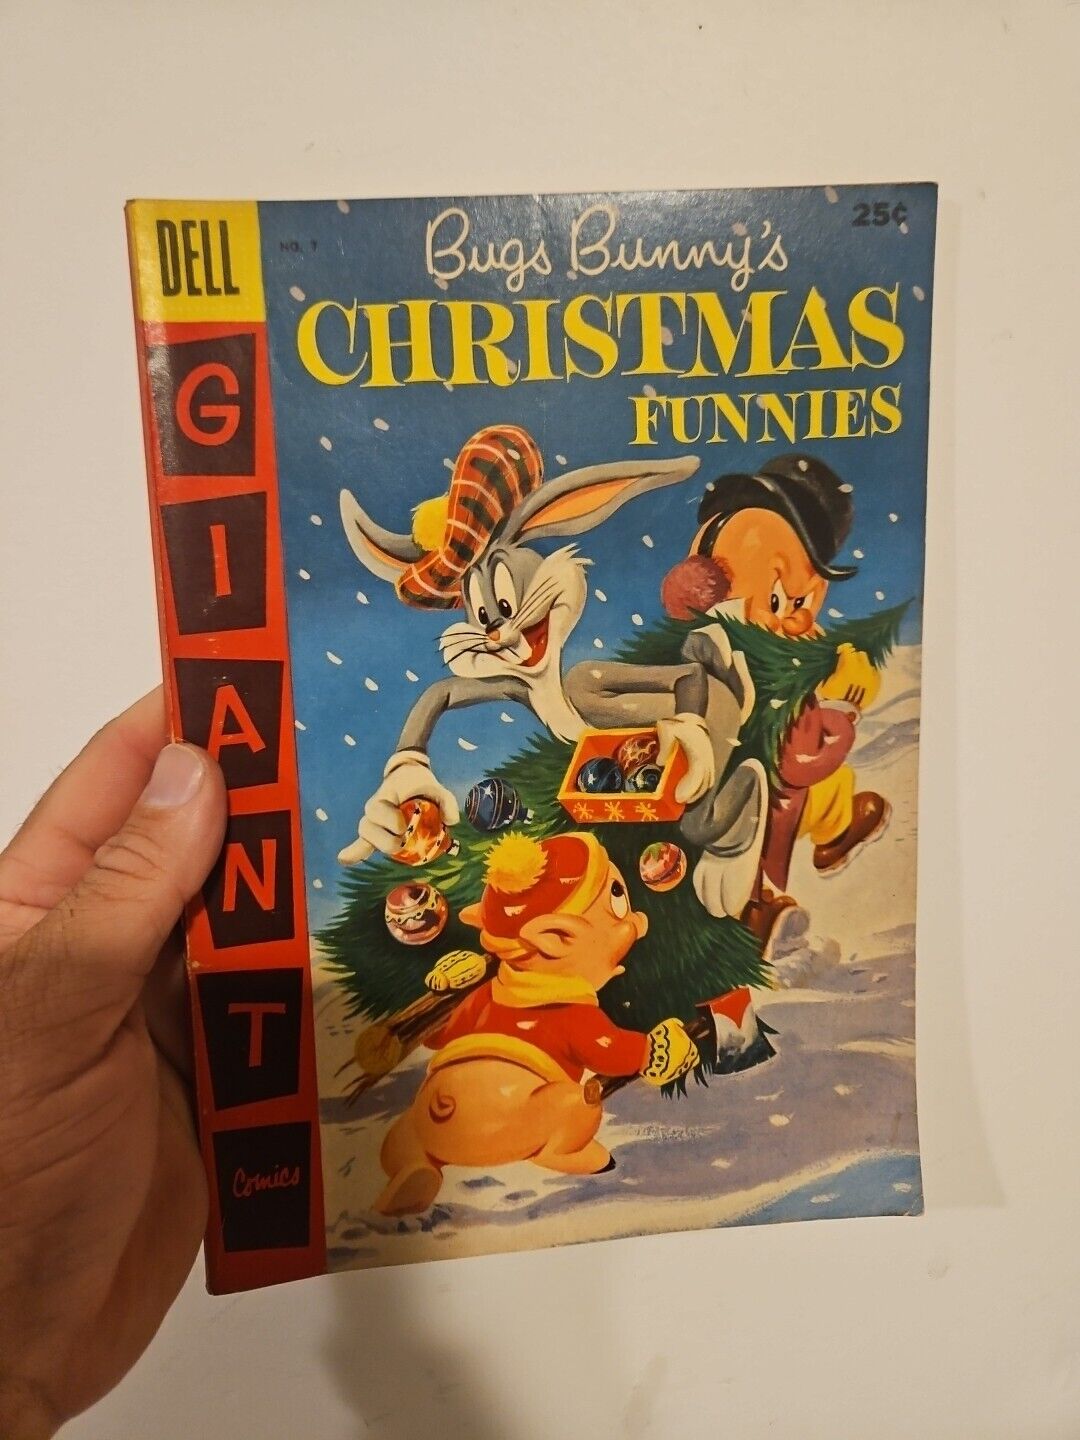 Bugs Bunny\'s Christmas Funnies #7 | 1st app Speedy Gonzales | Dell Giant 1956